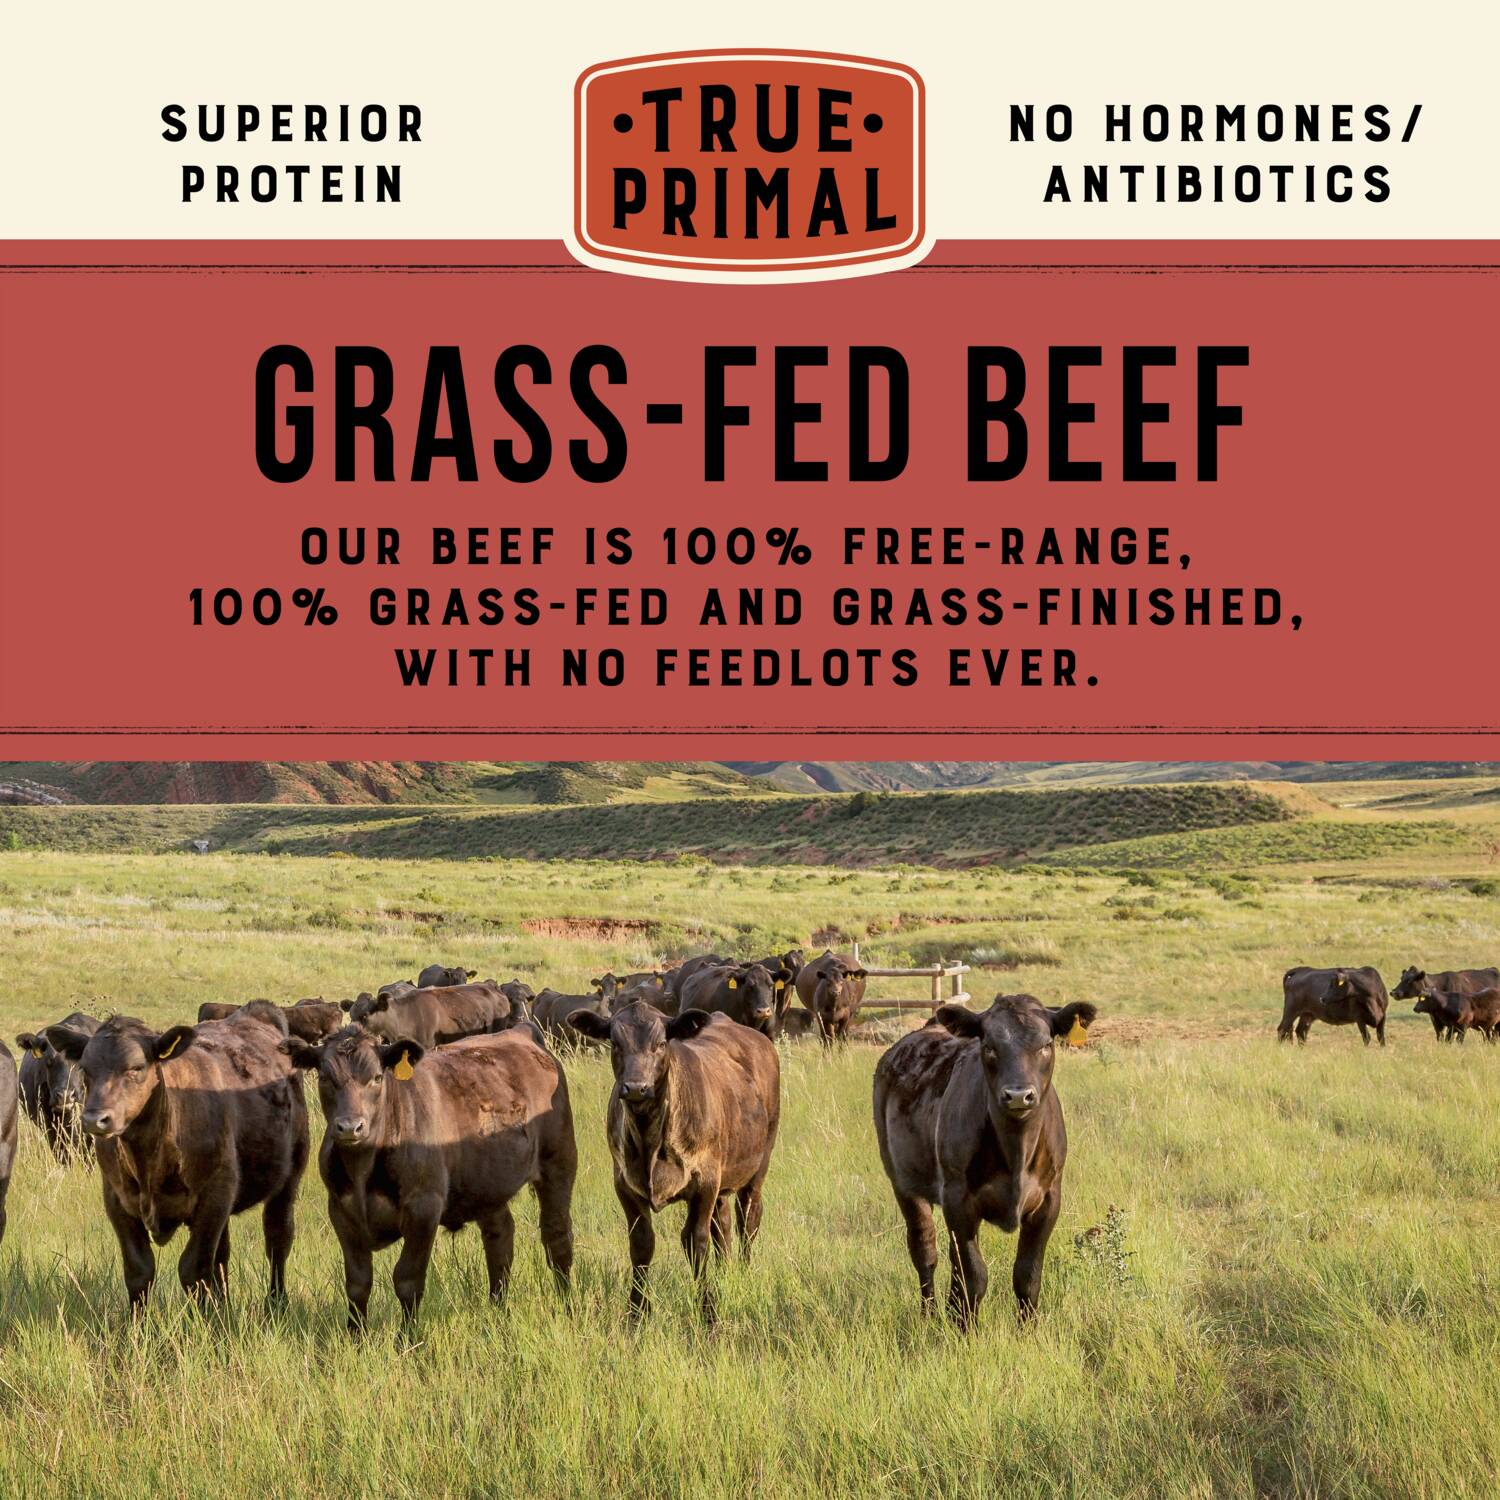 cattle grazing in field with title text: grass-fed beef